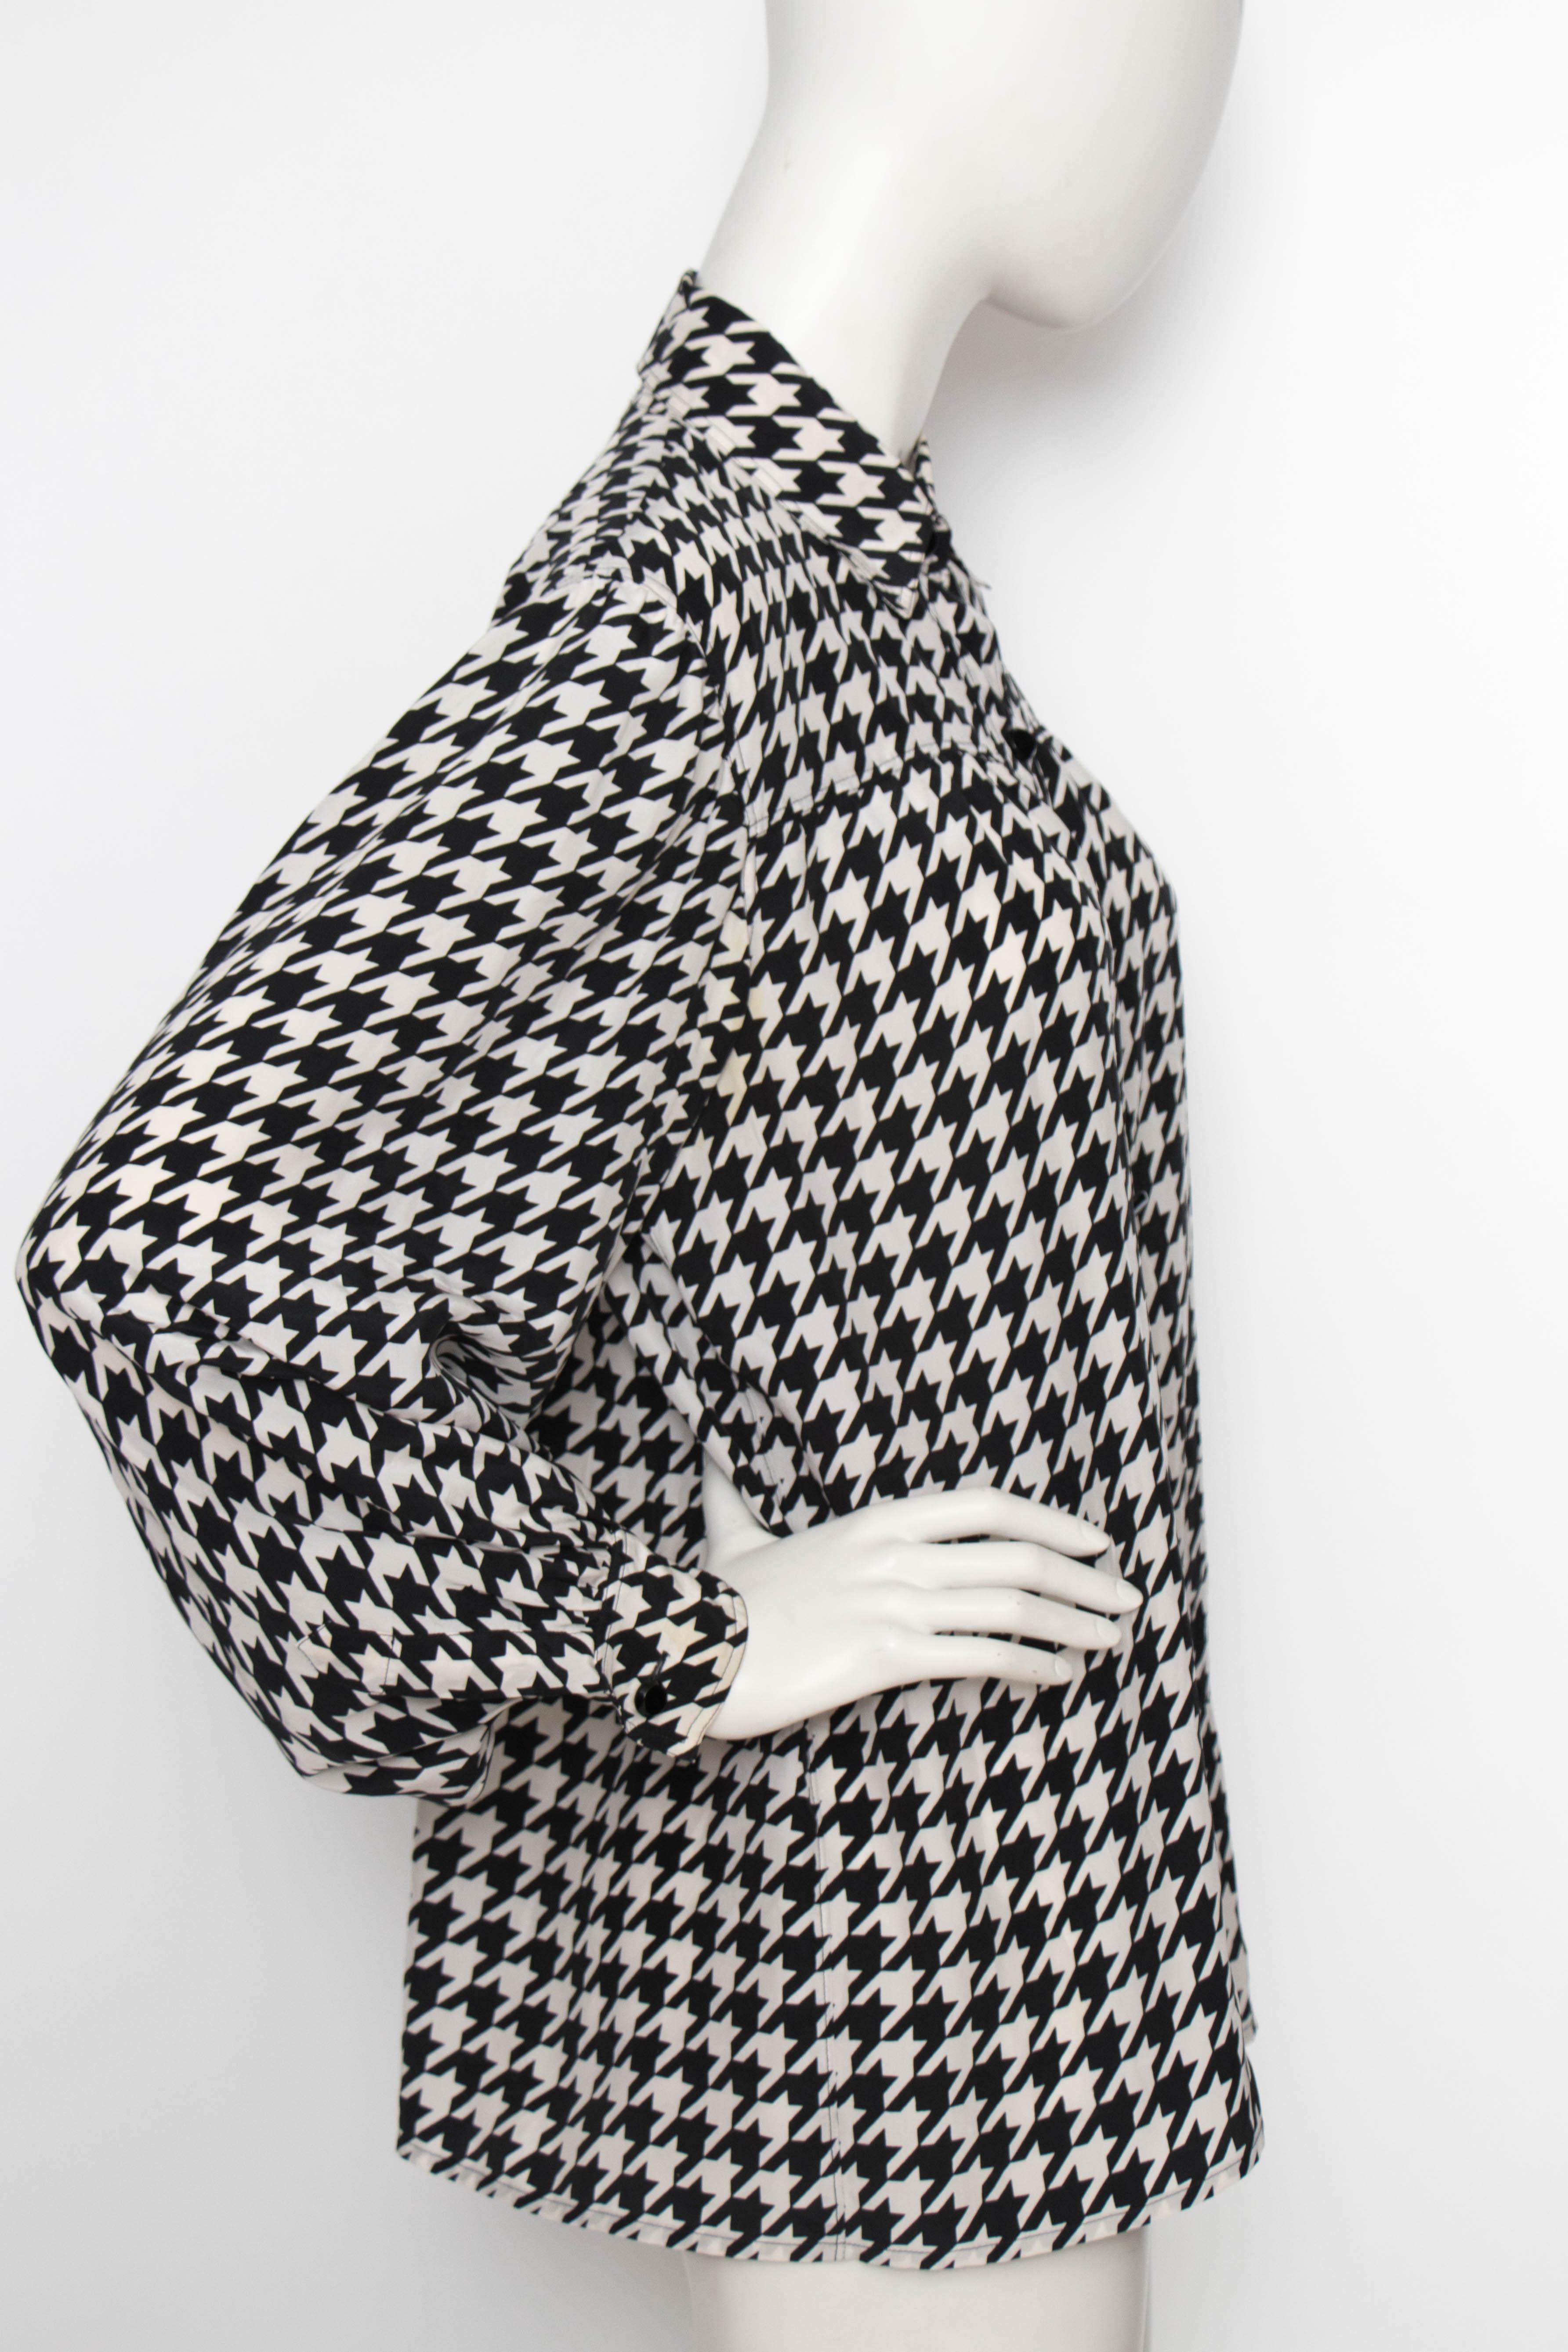 A 1980s Yves Saint Laurent Variation black and white houndstooth print shirt with a button-down front and fitted cuffs.

The size of the louse corresponds to a modern size large, but please see the measurements below to ensure the right fit. 